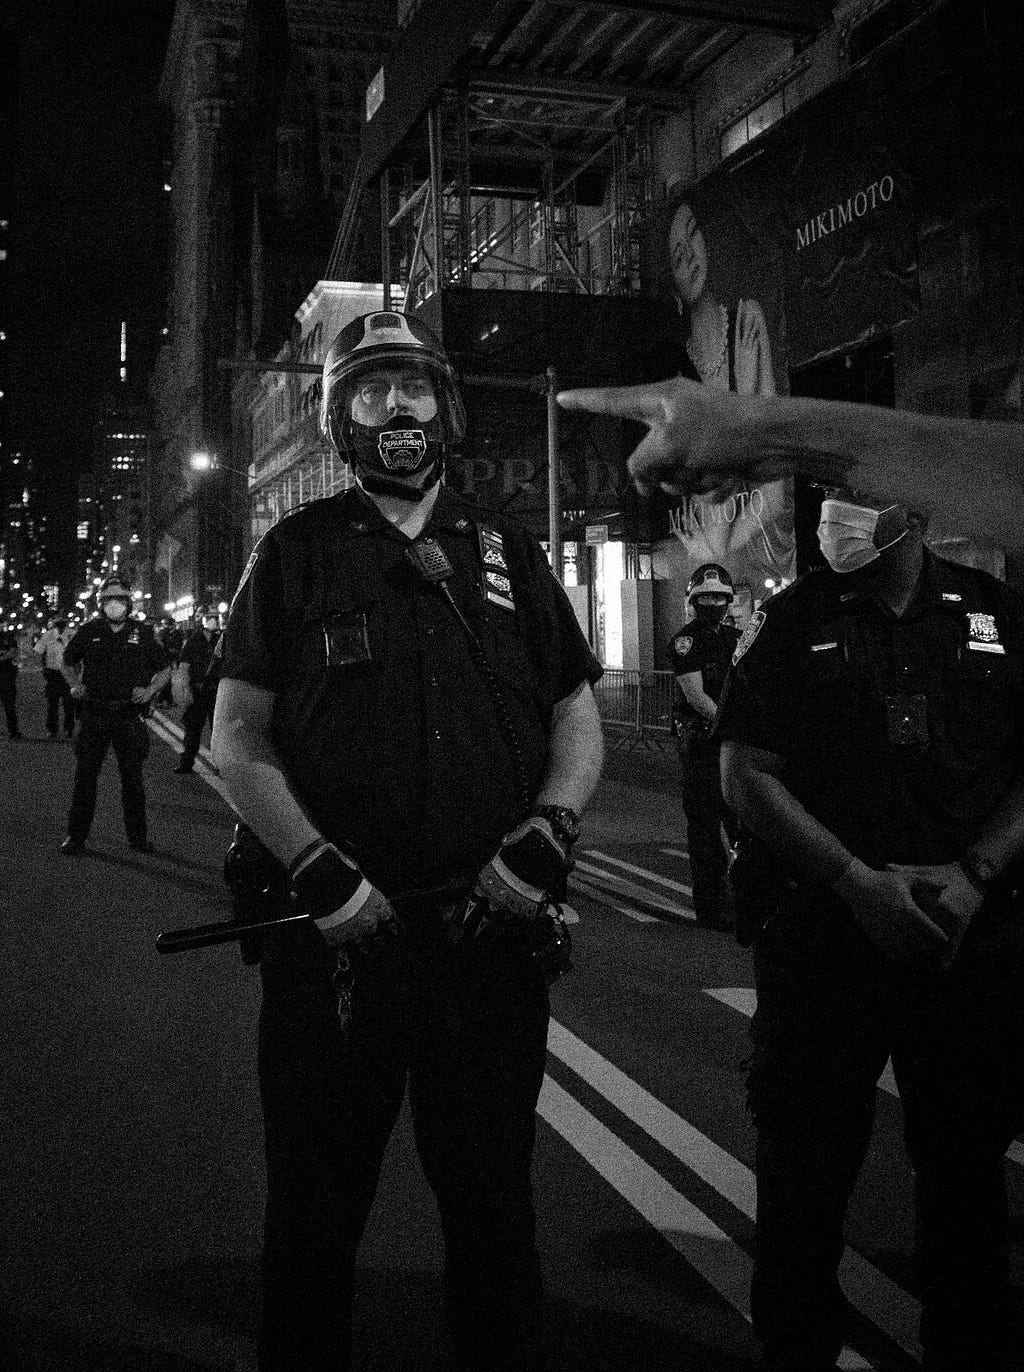 A hand points towards the head of an NYPD police officer during BLM protests